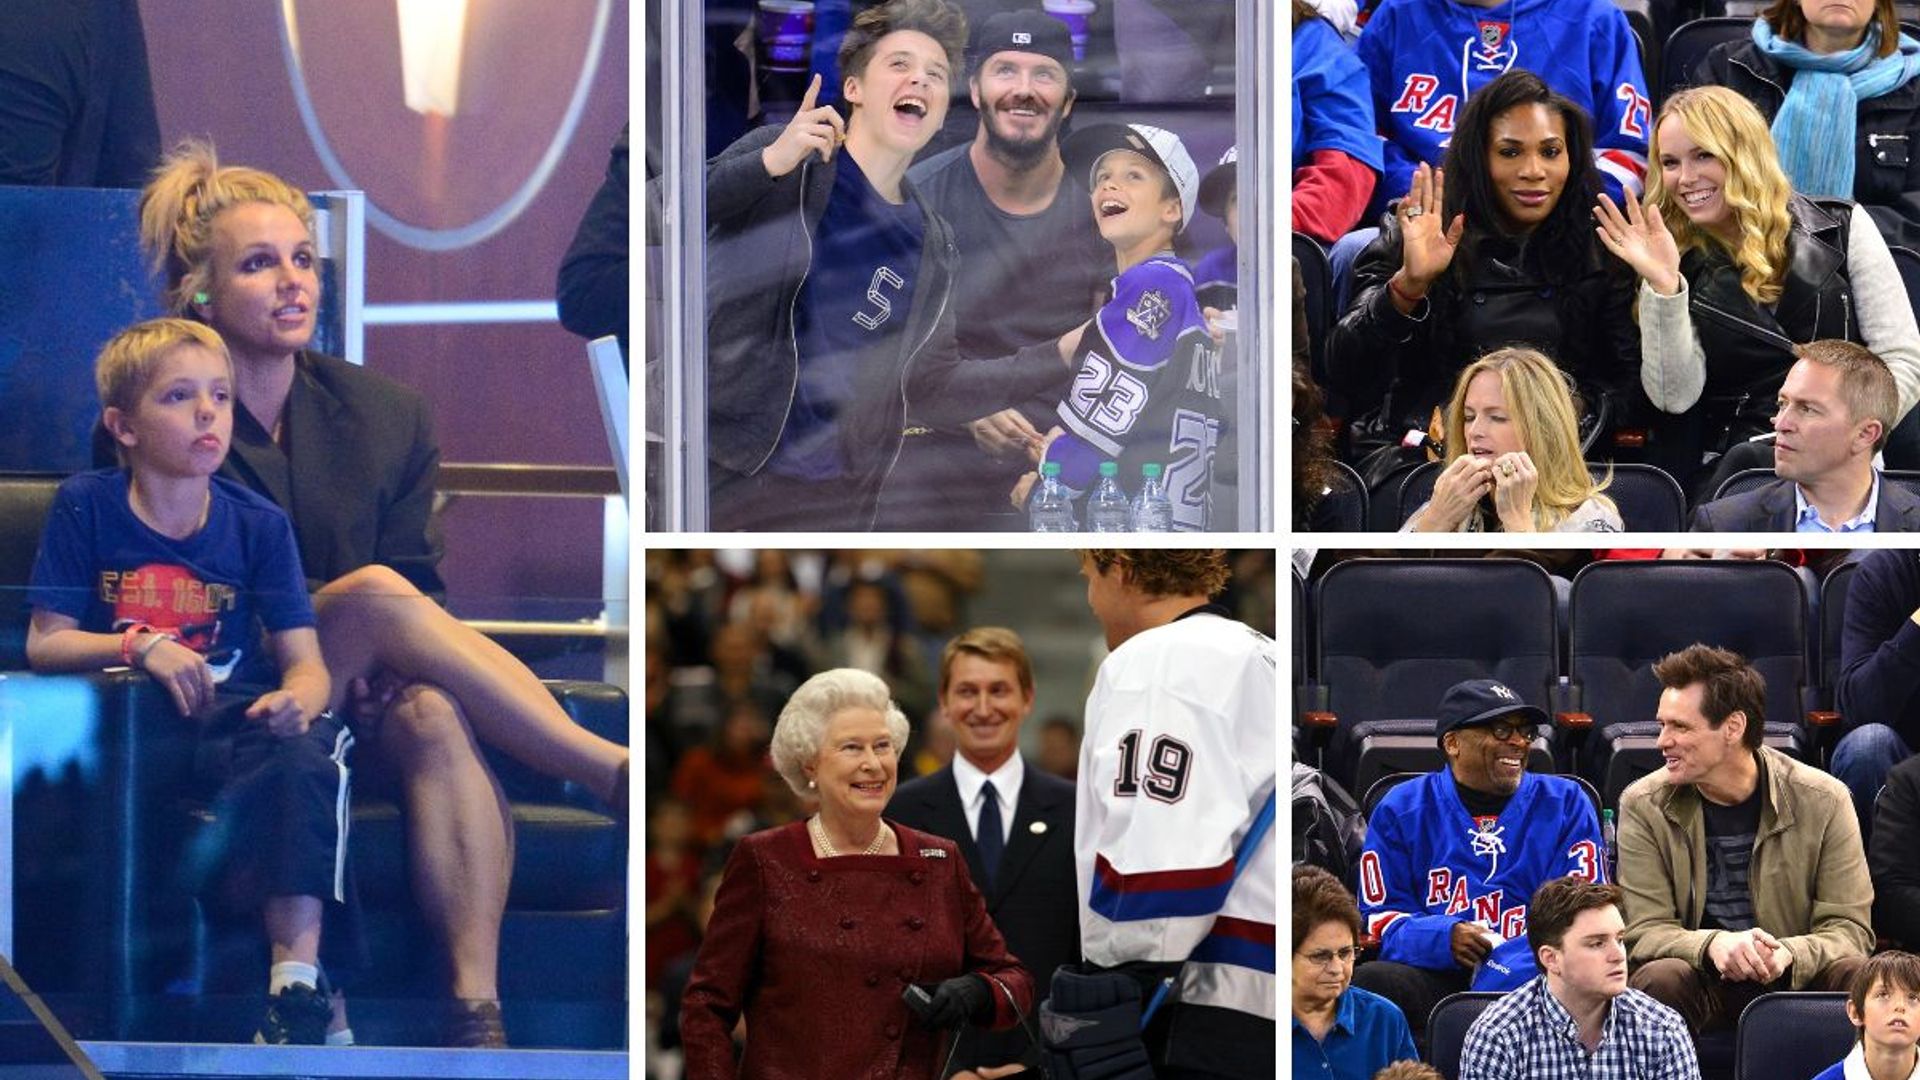 Celebs out in force cheering for Rangers  New york rangers, Spike lee,  Hockey fans